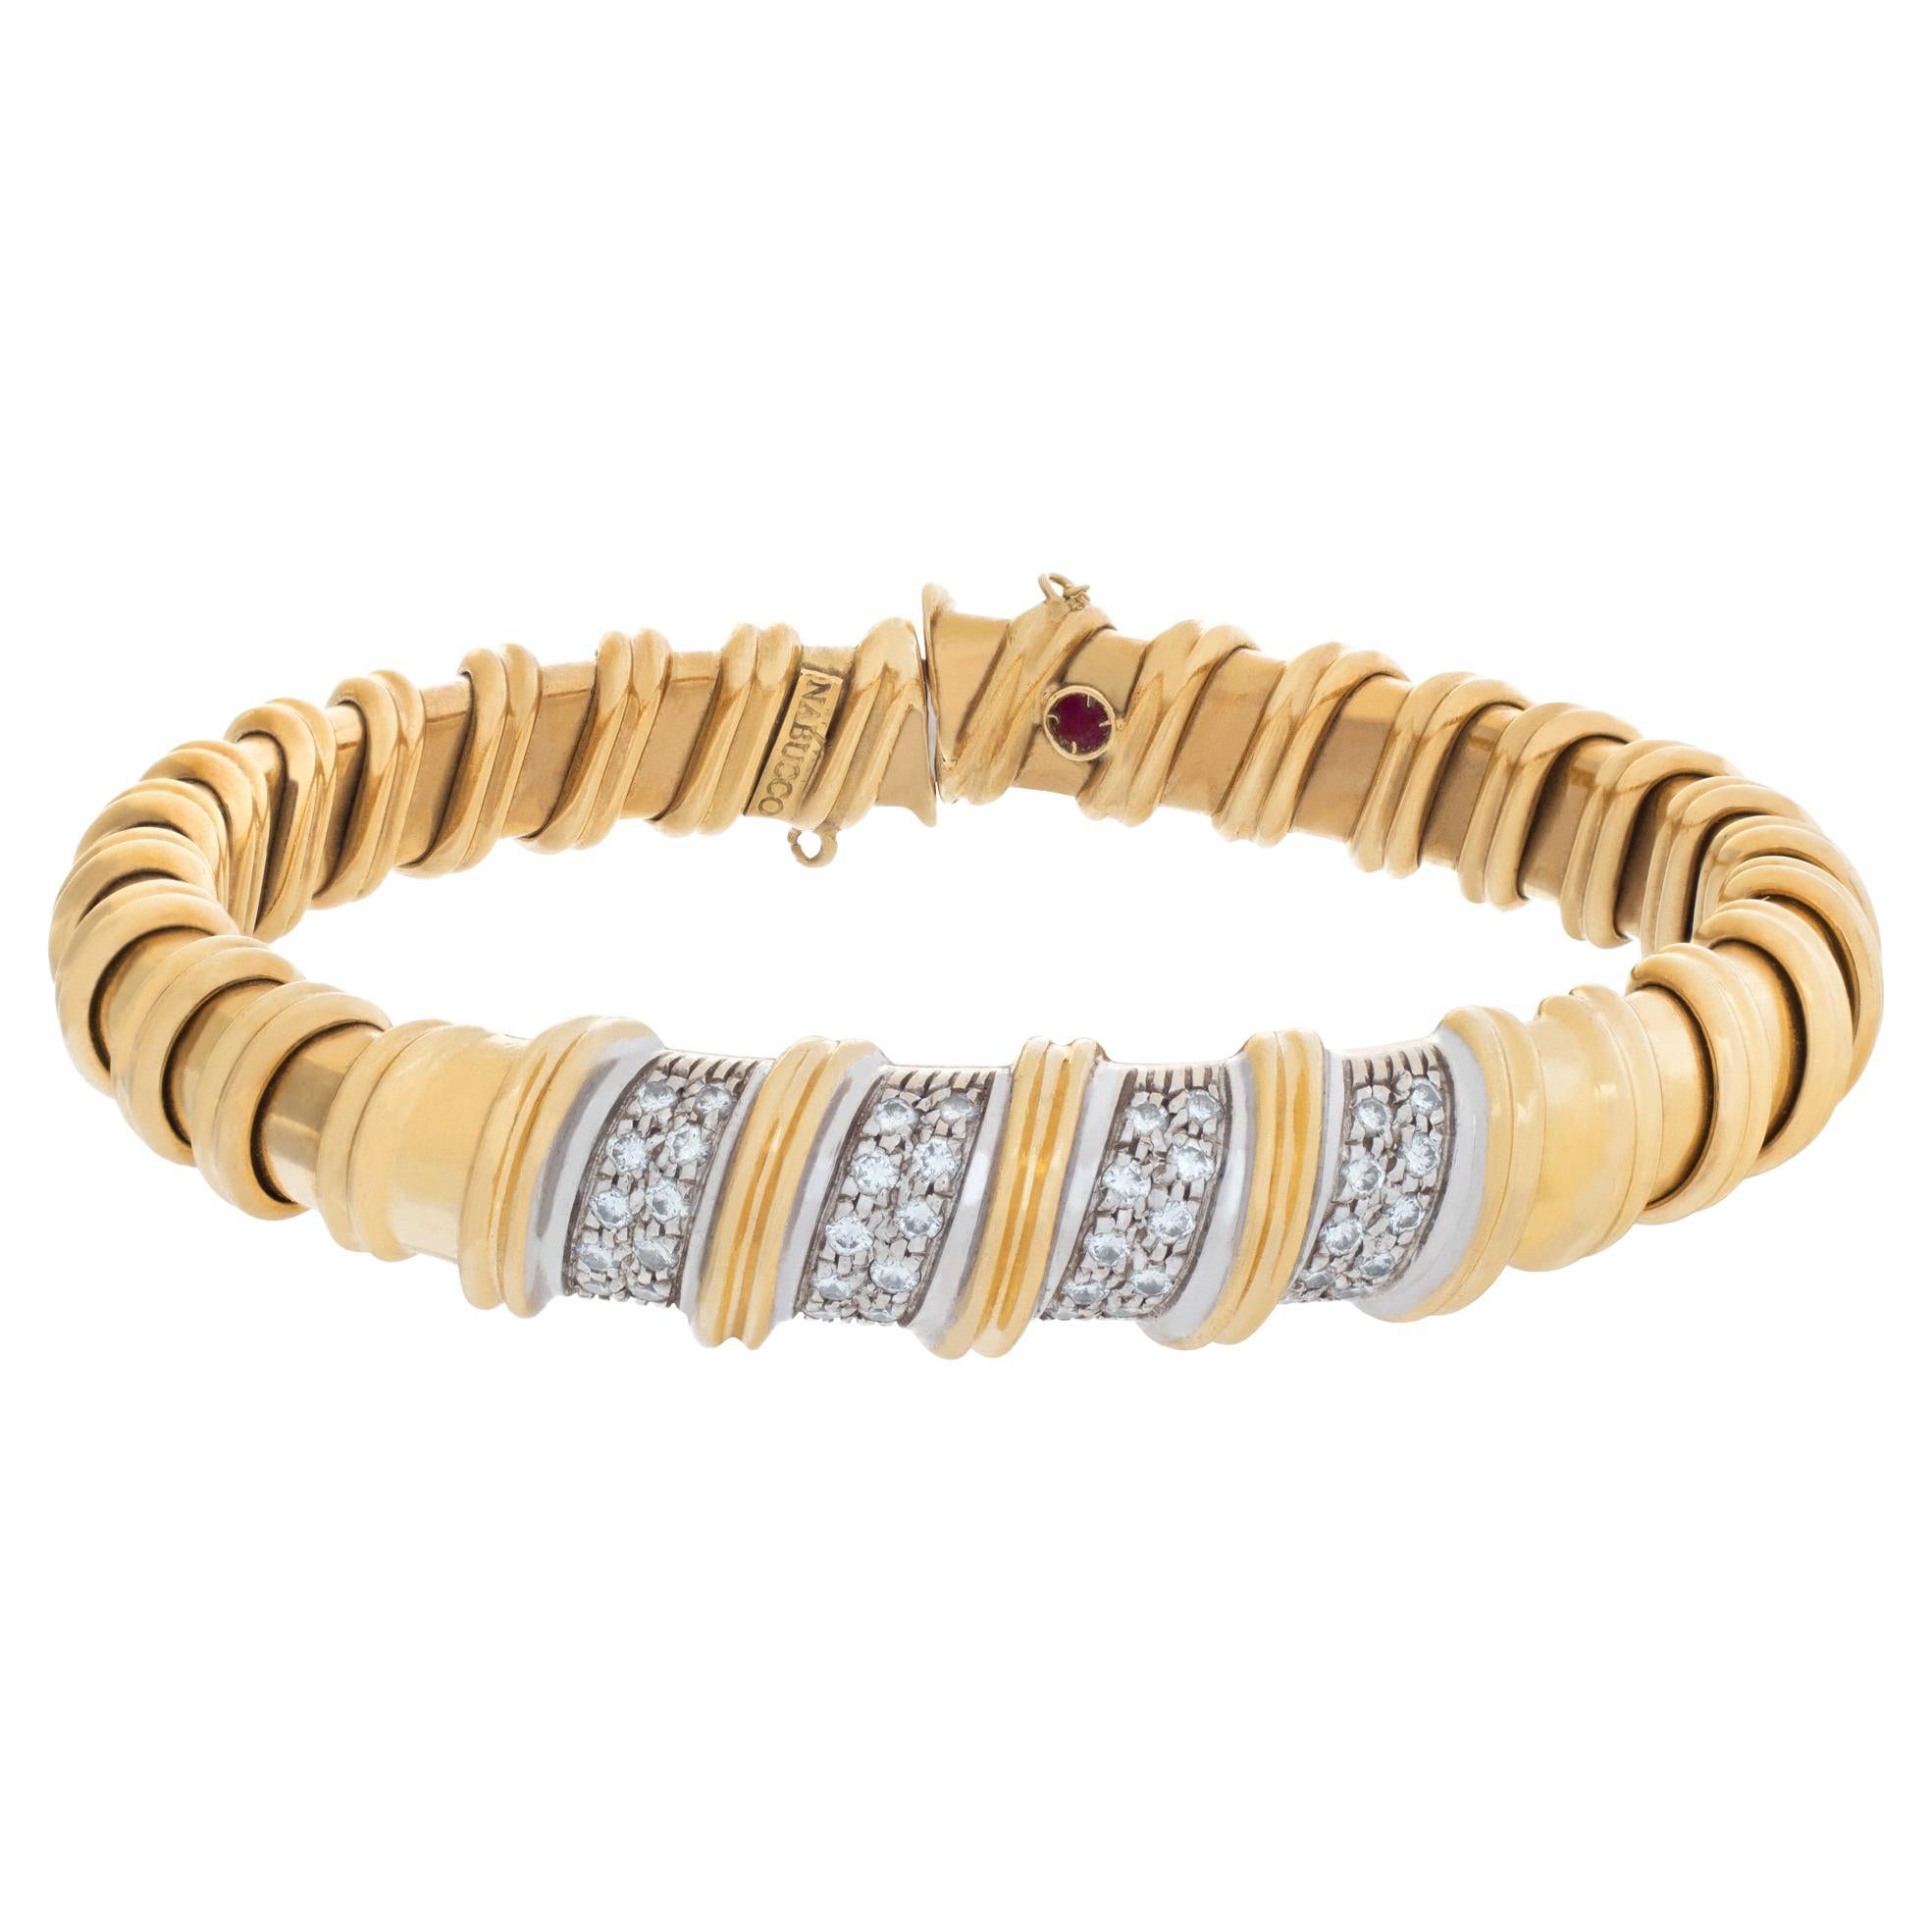 18k Yellow Gold Diamond Bracelet With Approximately 0.5 Carat Tdw For Sale